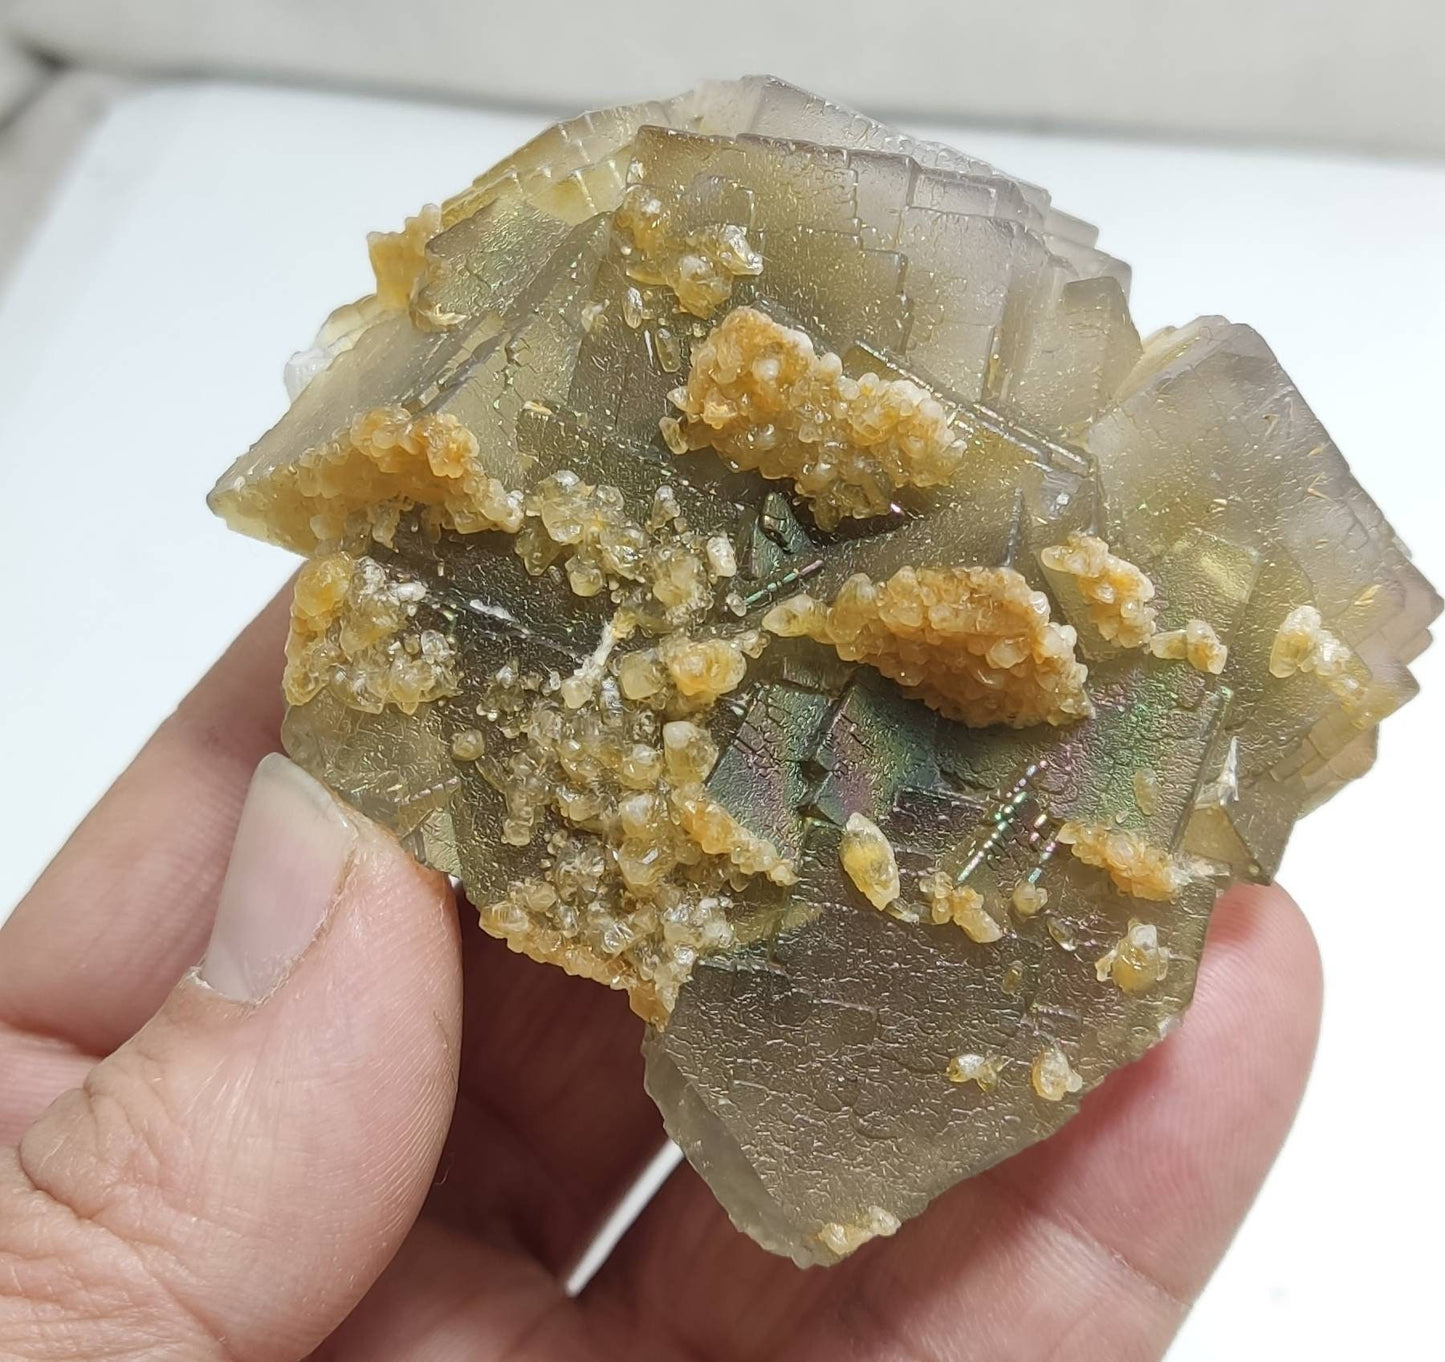 An aesthetic combo specimen of Fluorite and Calcite 236 grams